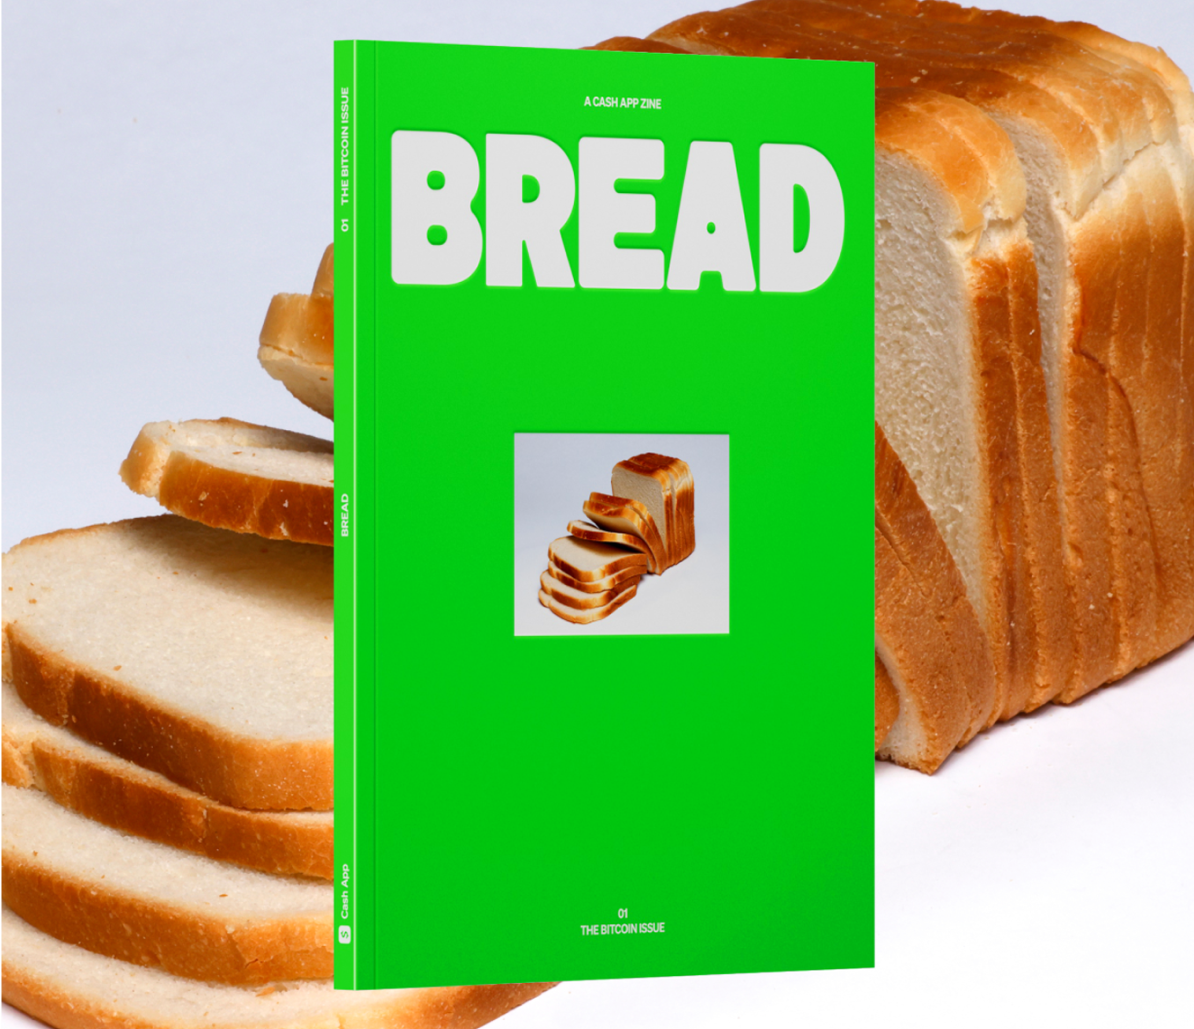 A copy of Cash App’s BREAD book next to sliced white bread.